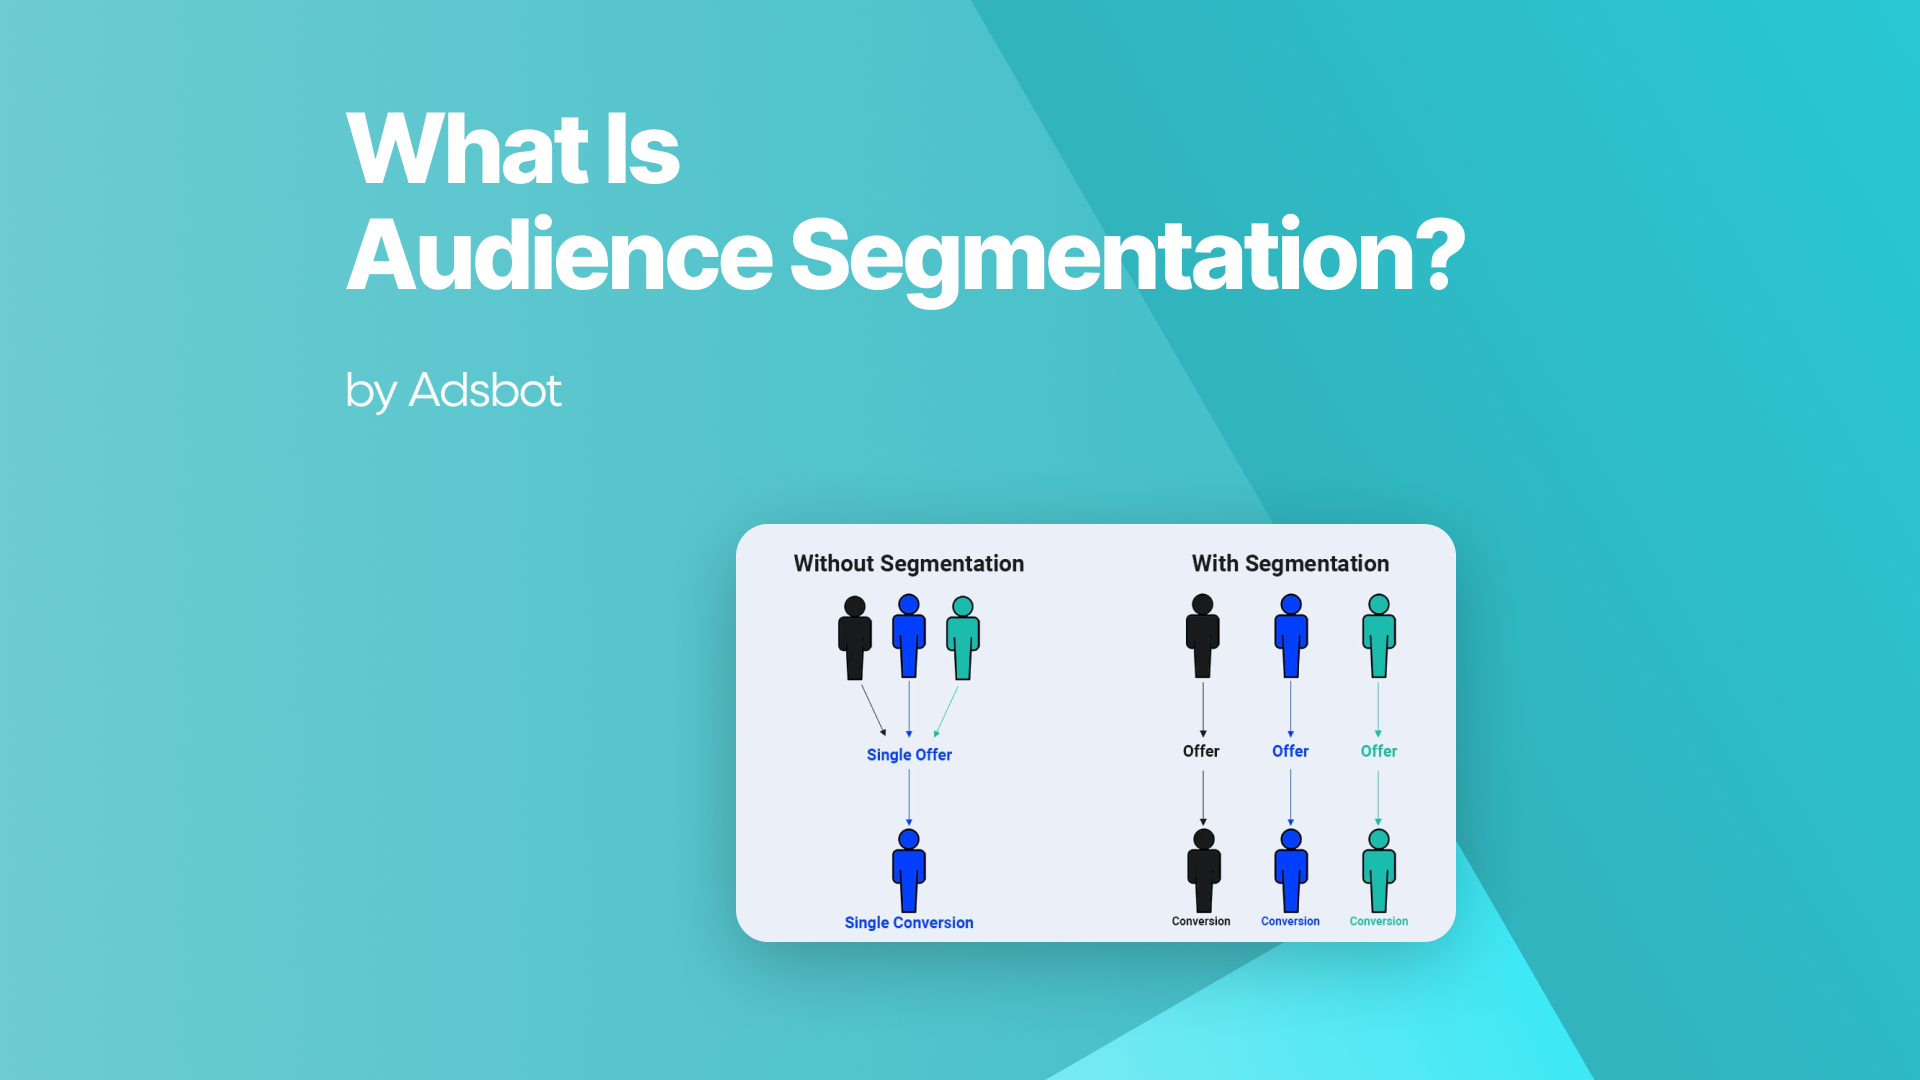 What Is Audience Segmentation?